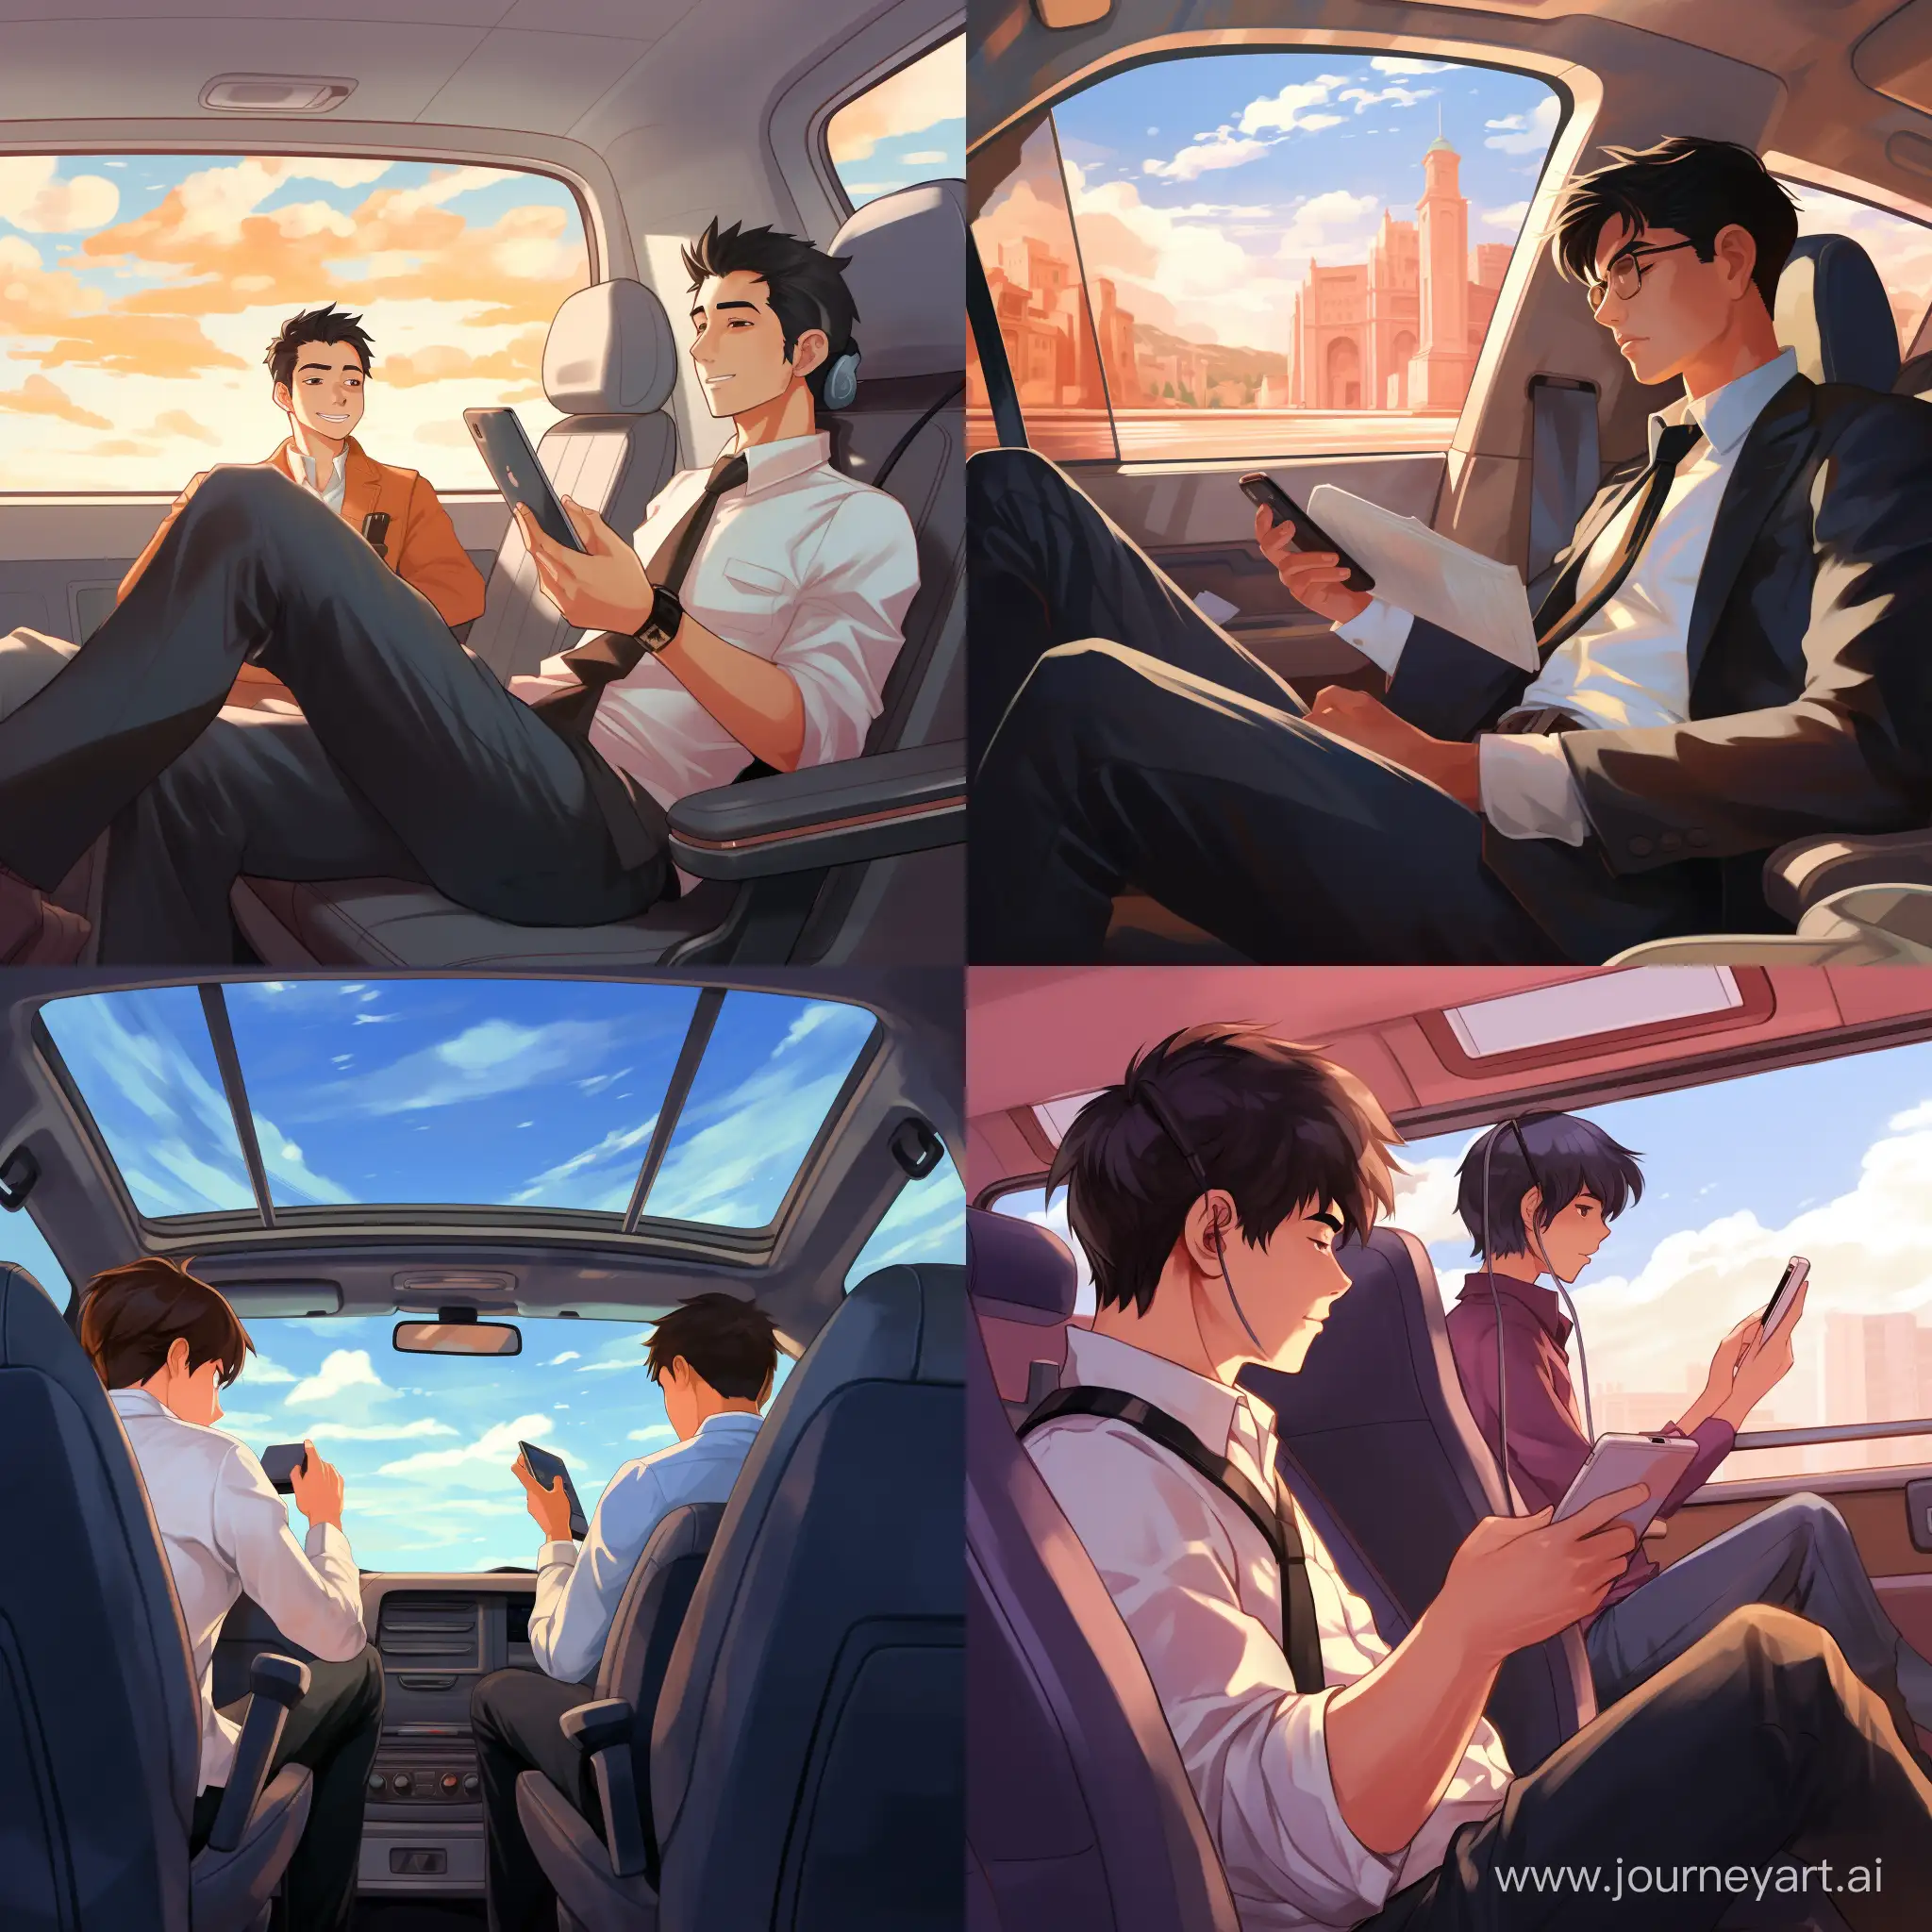 Business-Class-Car-Interior-with-AnimeInspired-Passenger